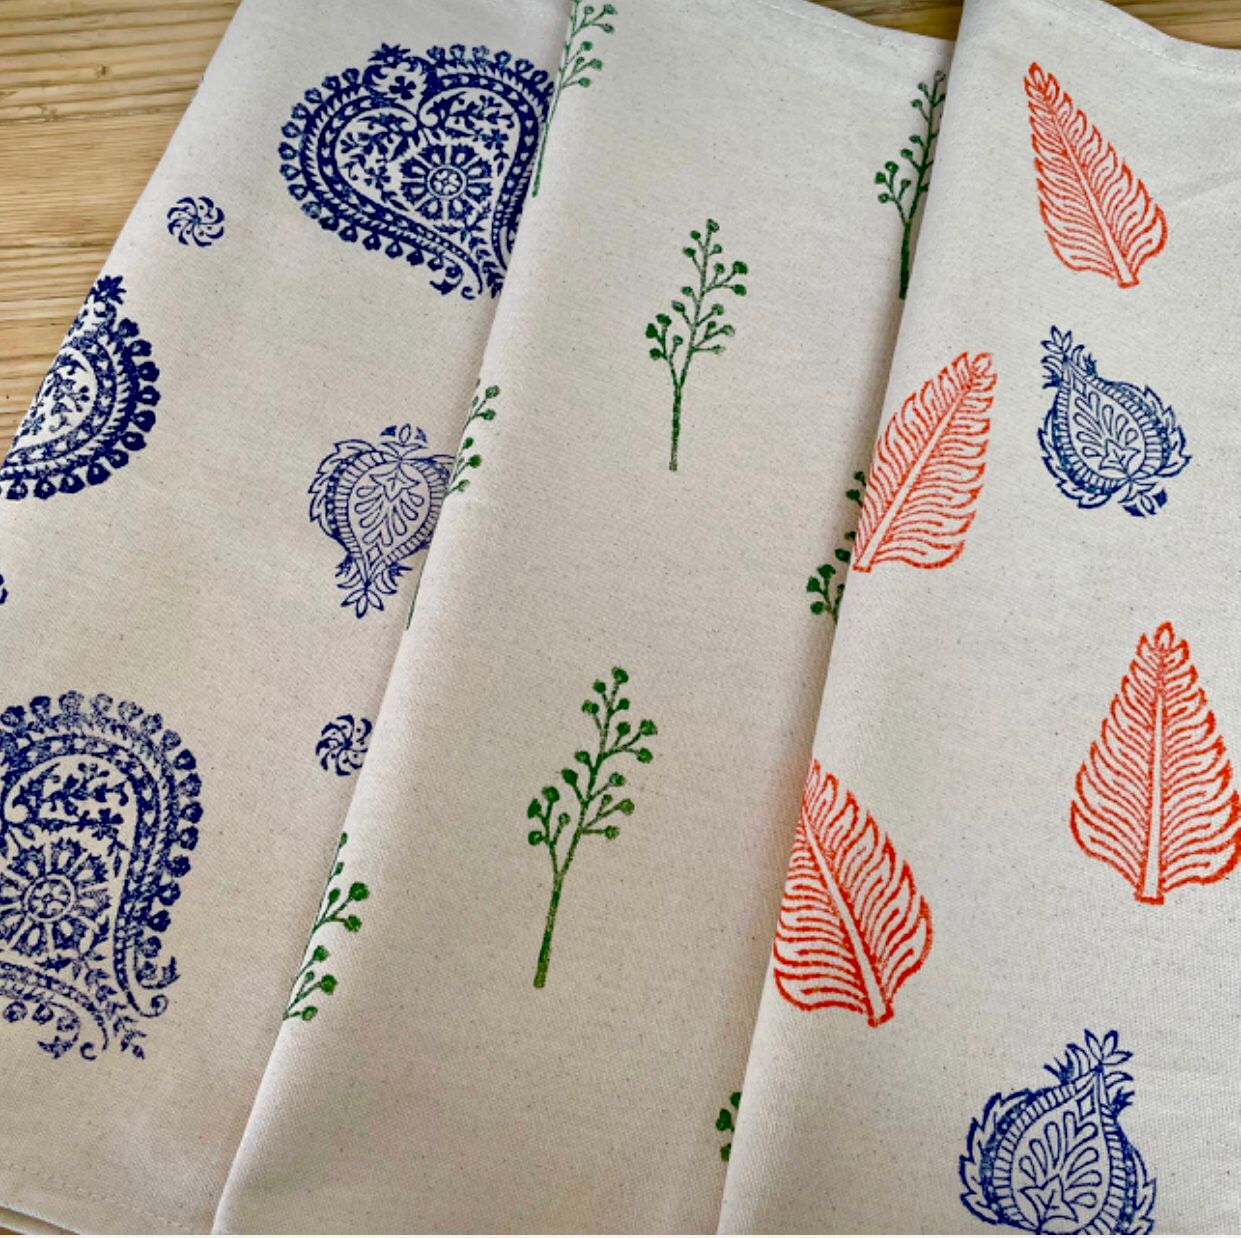 Indian Block Printing Workshop – Friday 7th June - 10.30am - 12.45pm - Waterperry Gardens, Waterperry, Oxon OX33 1JZ